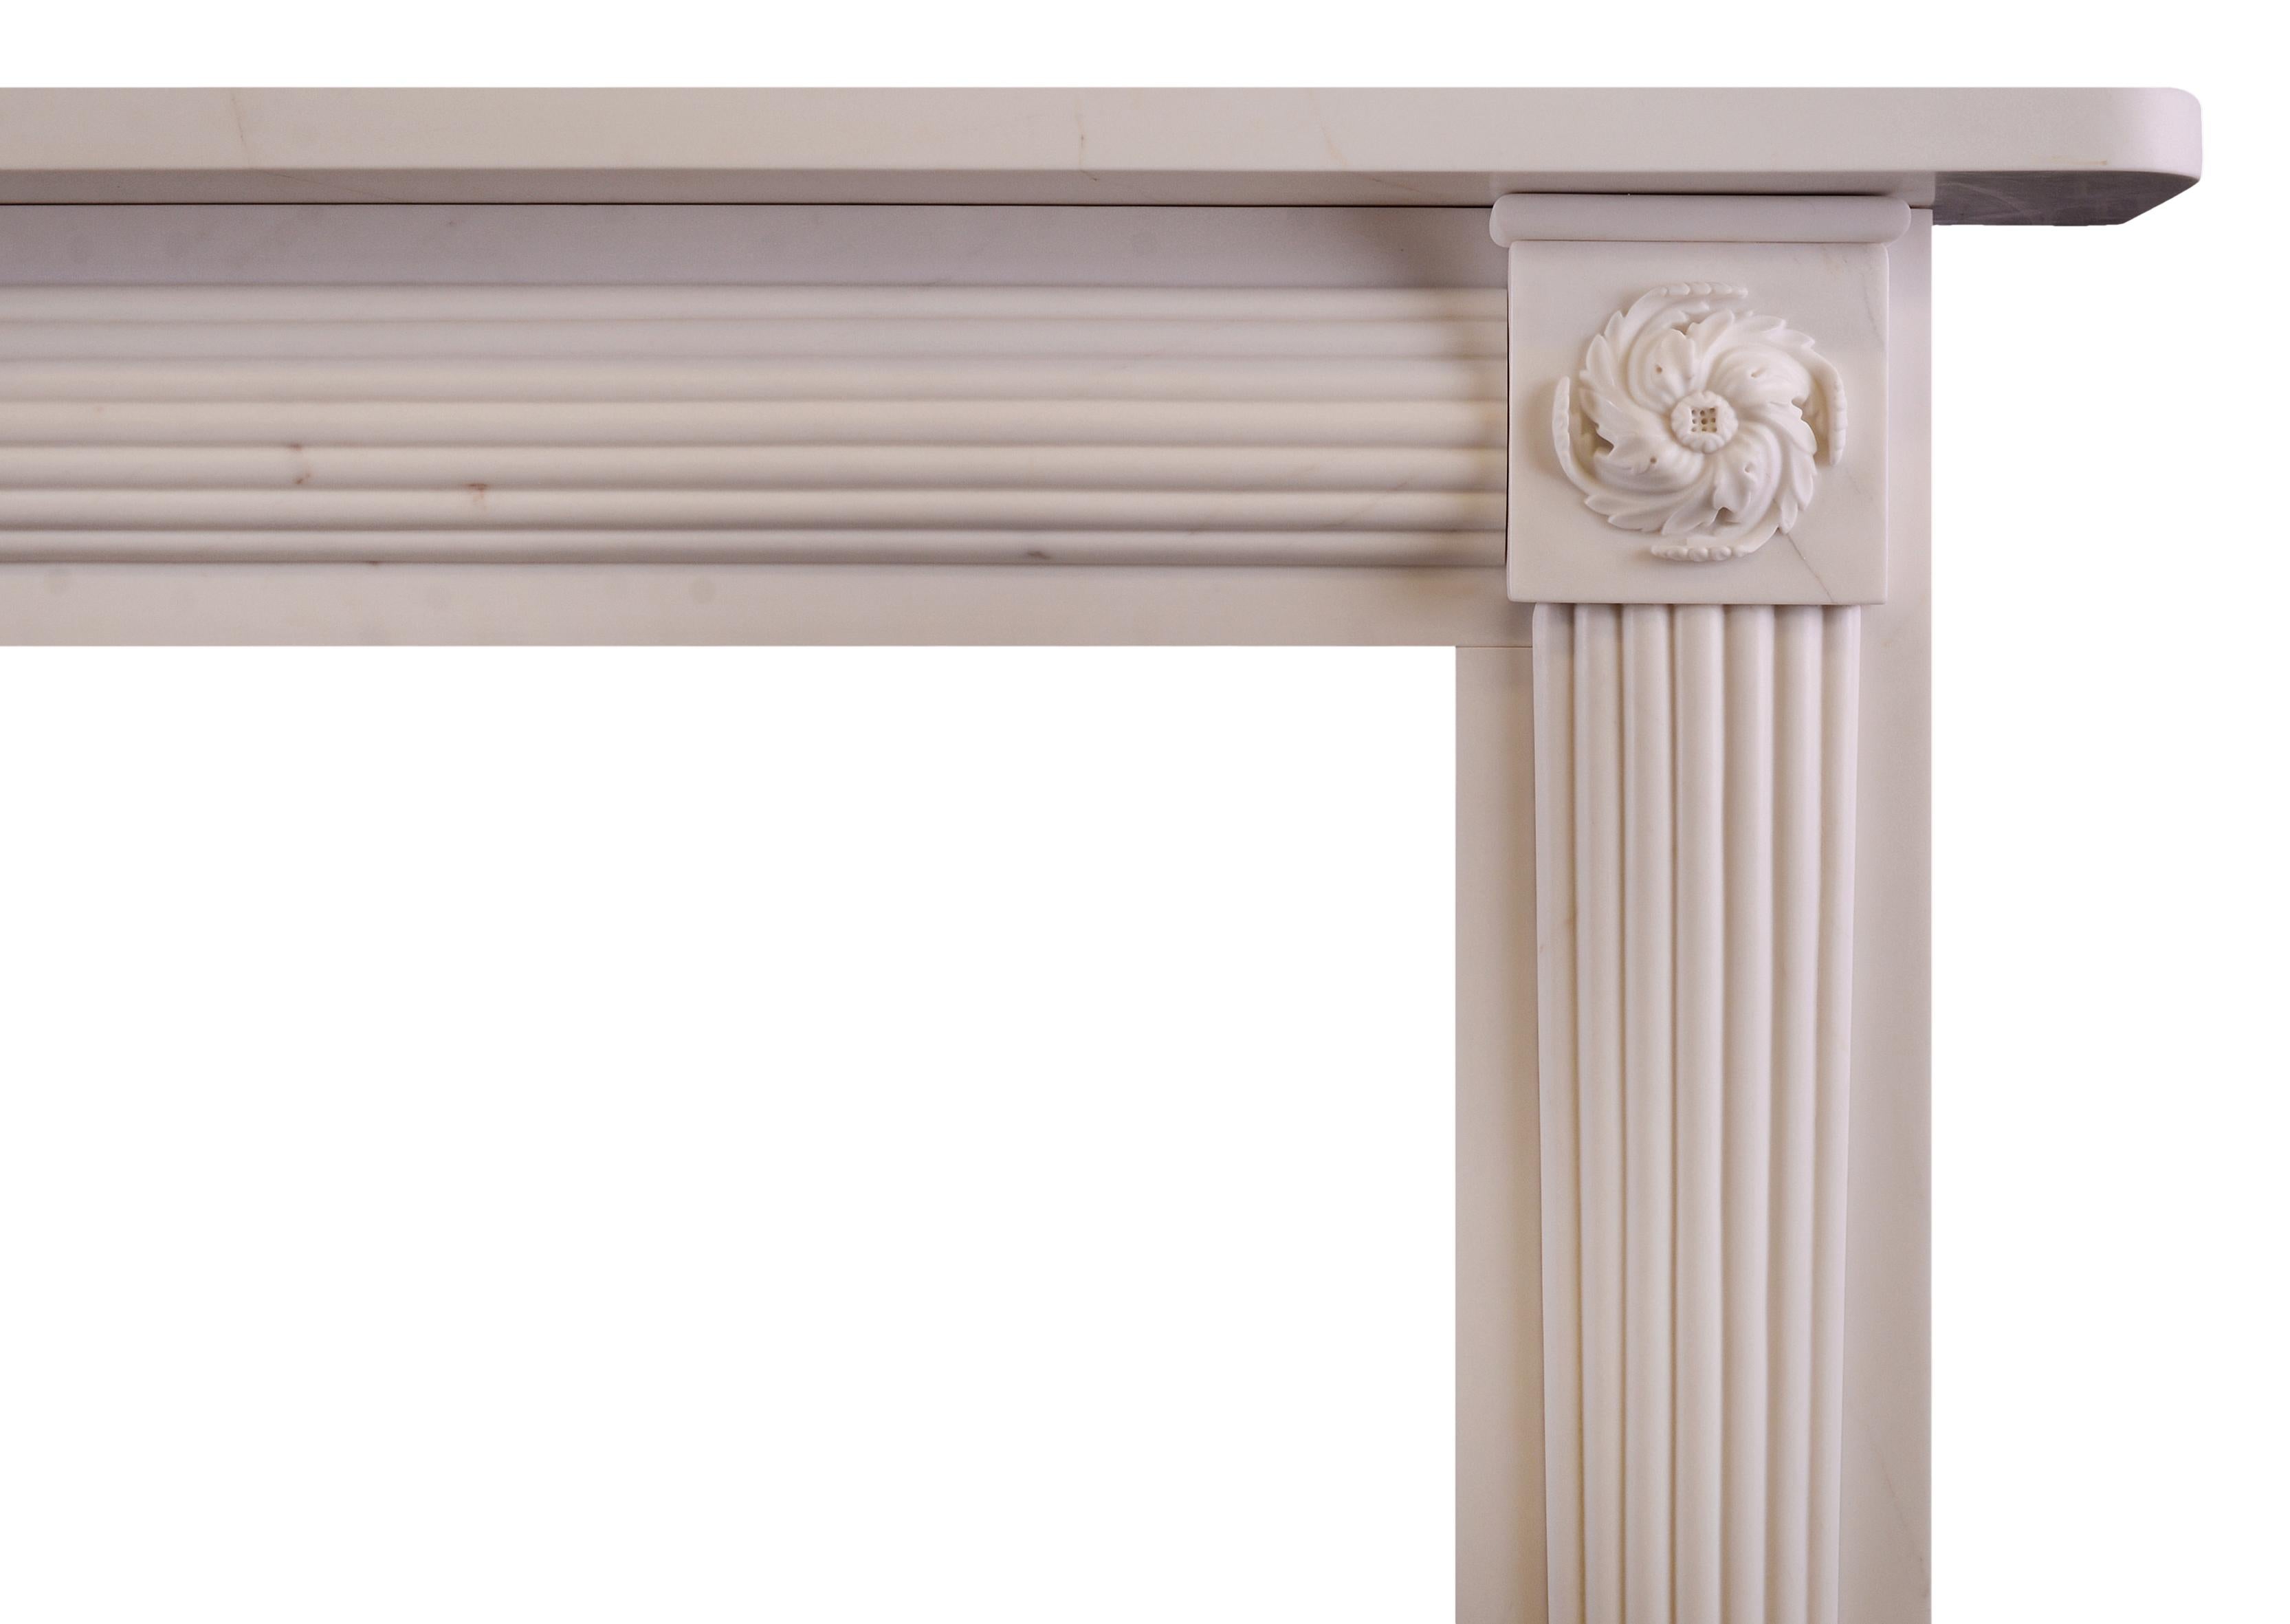 A Regency style white marble fireplace. The tapered, reeded jambs surmounted by finely carved swirling finials. The frieze with convex reeding throughout. Plain shelf above. An elegant piece, well suited for smaller Drawing Room or Bedroom. Modern.